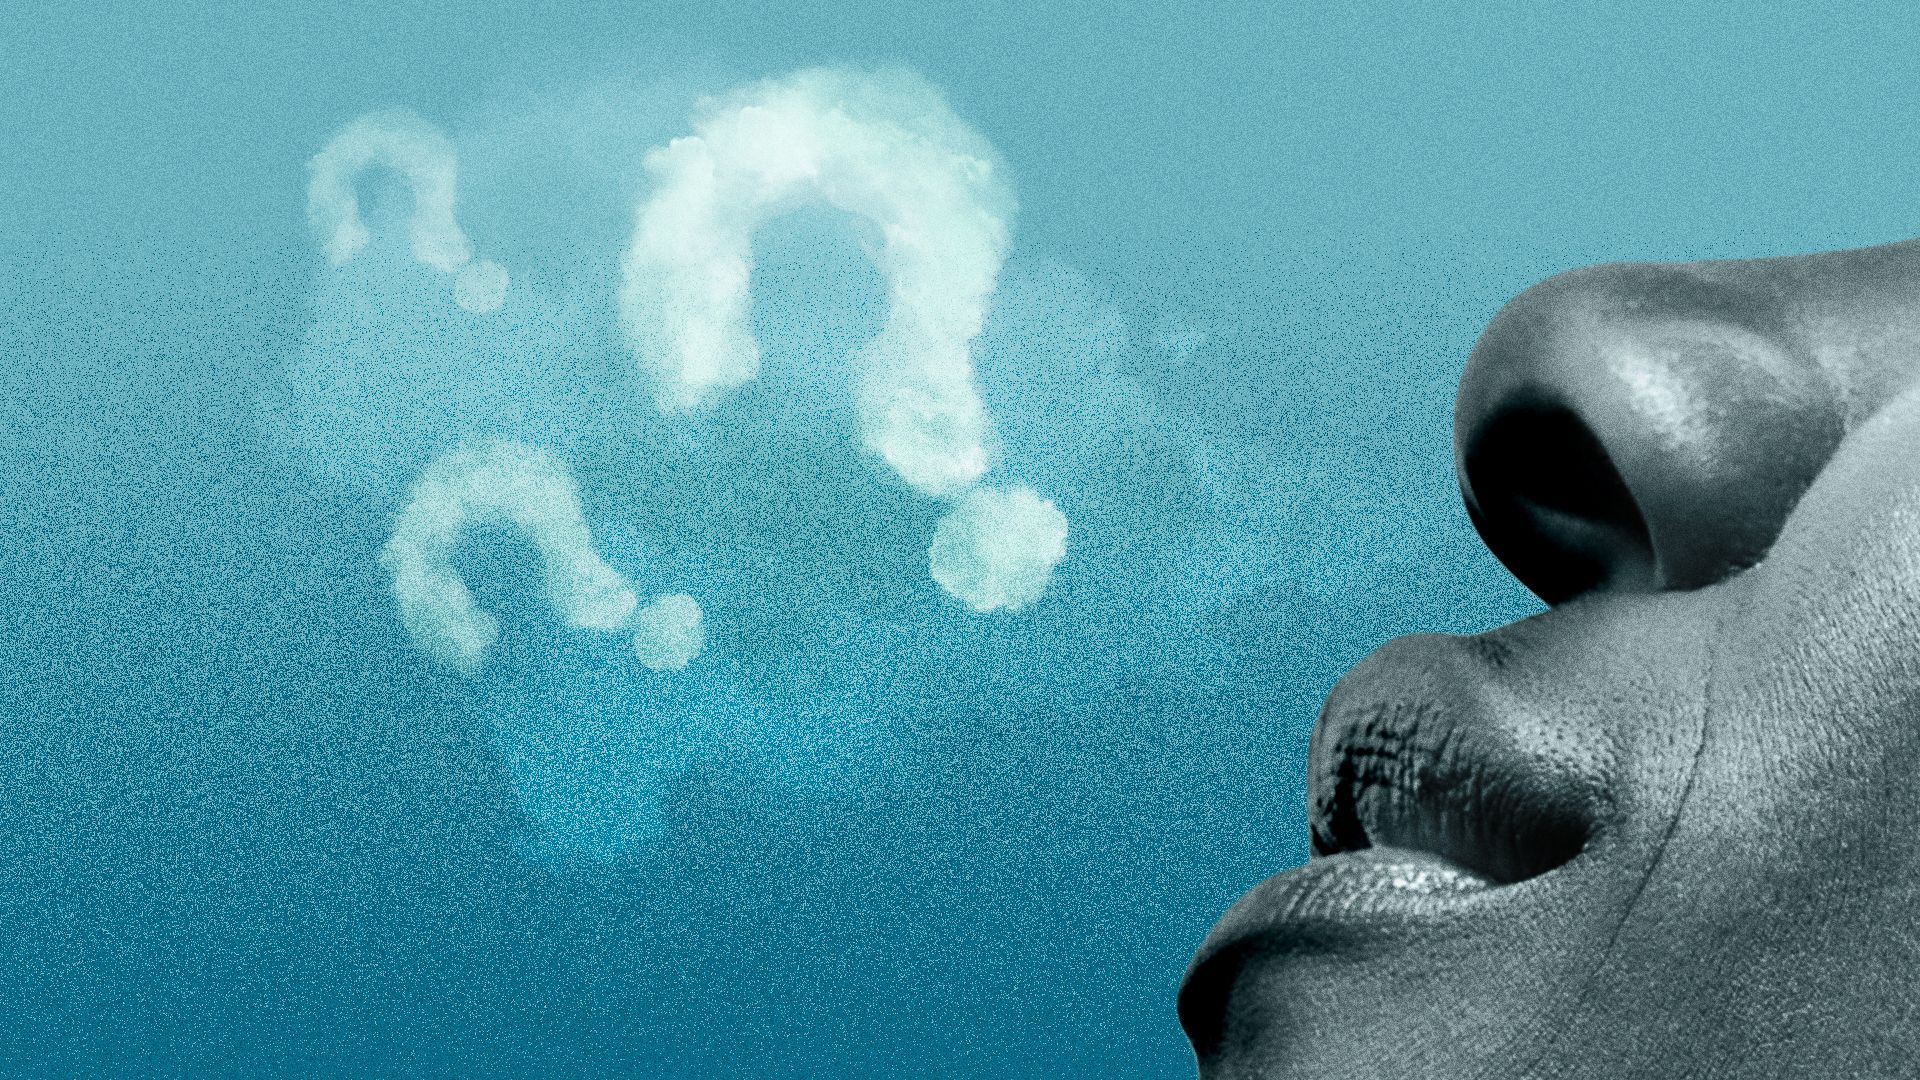 Illustration of a woman smelling mystery question marks made out of smoke.